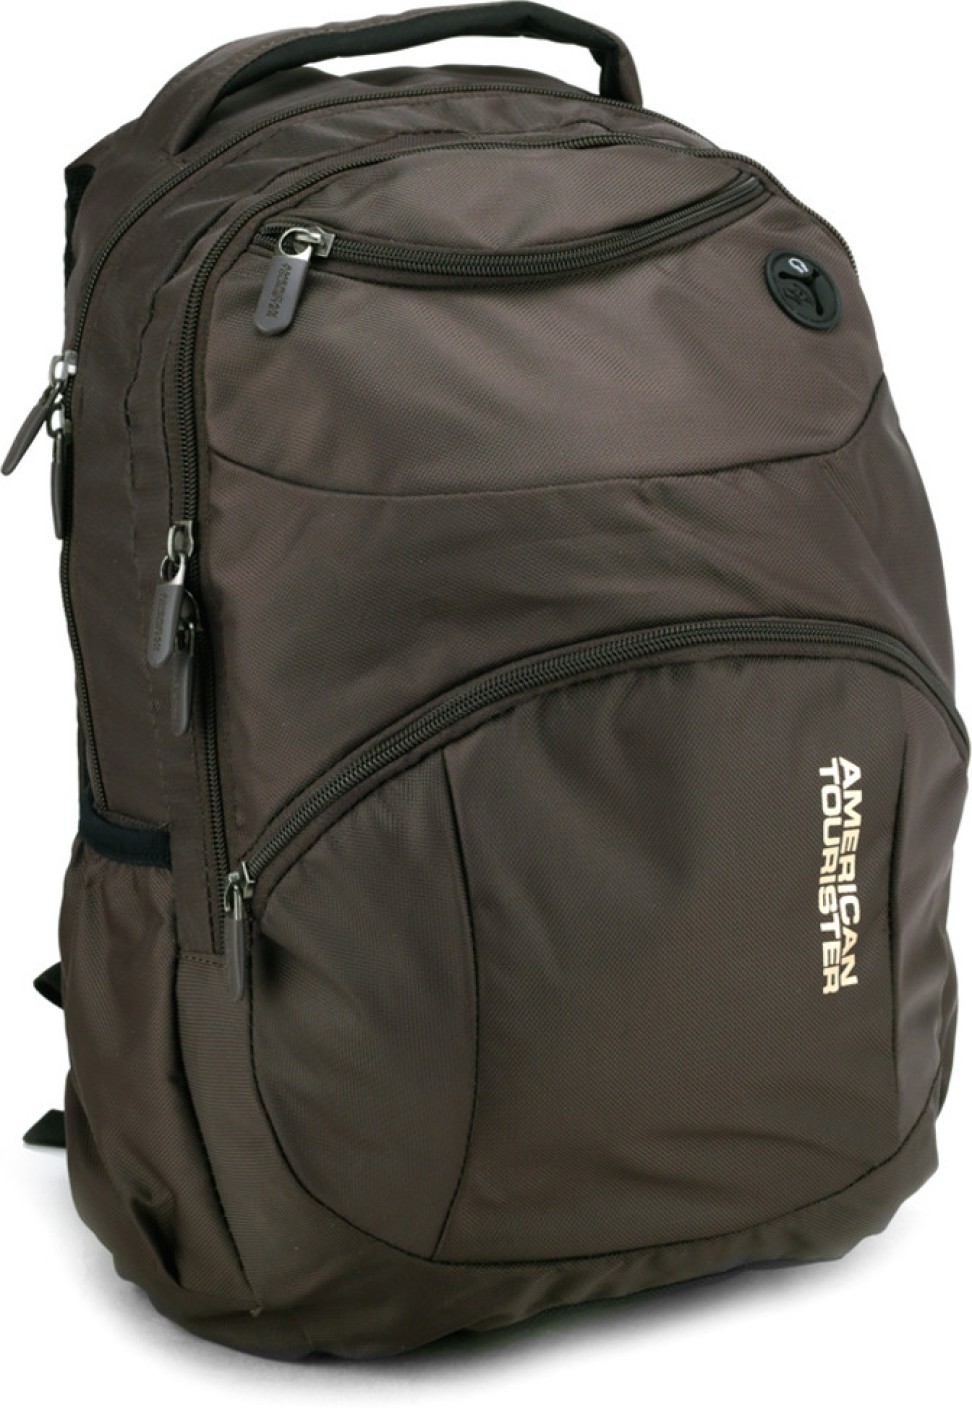 backpack bags for travel american tourister